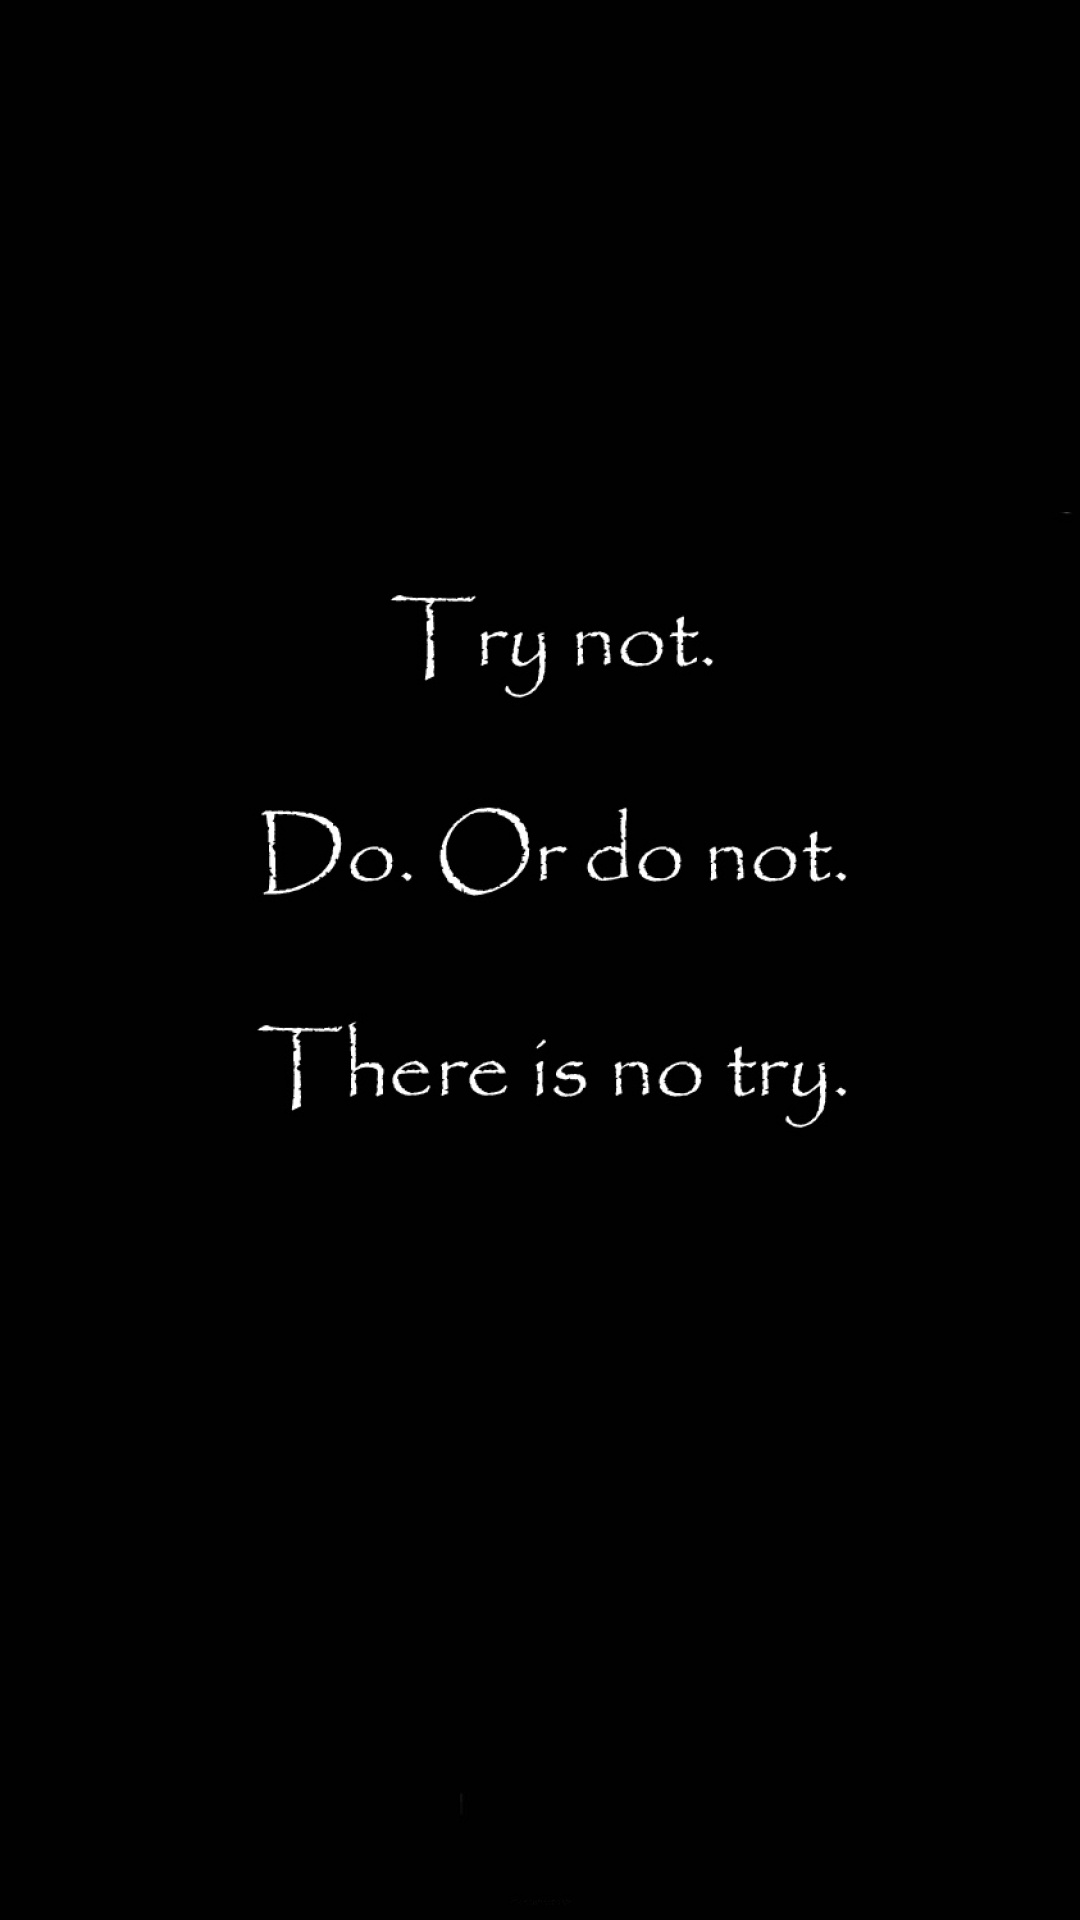 There Is No Try Android Wallpaper download 1080x1920